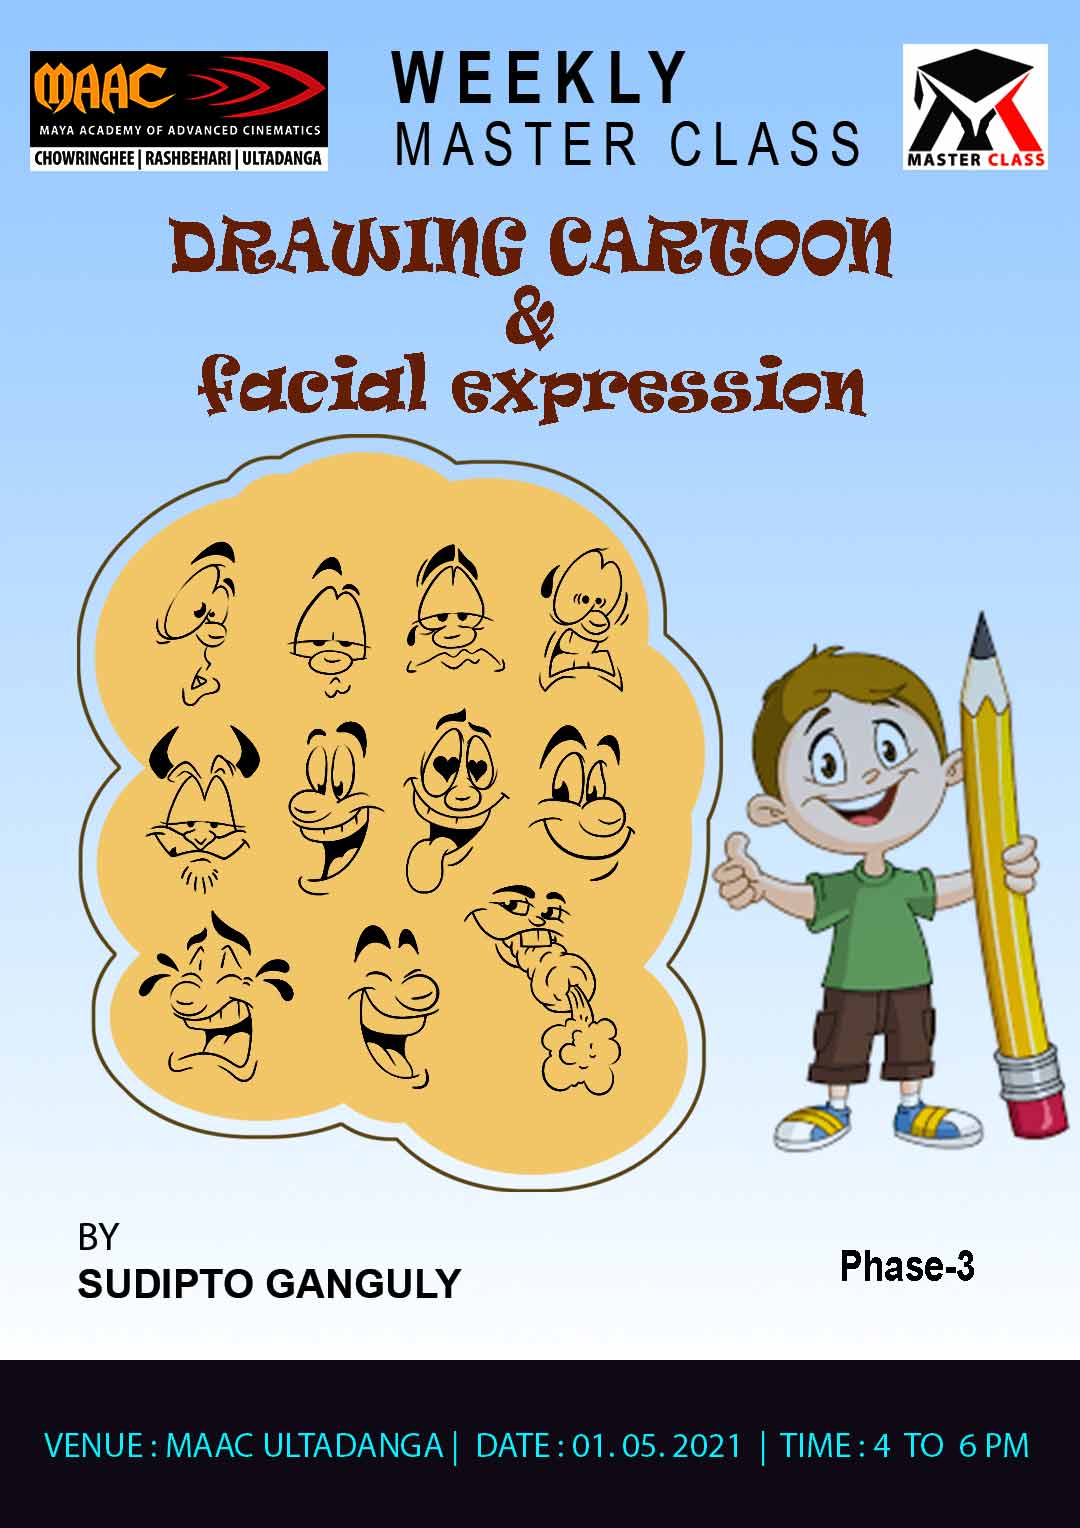 Weekly Master Class on Drawing Cartoon & Facial Expression